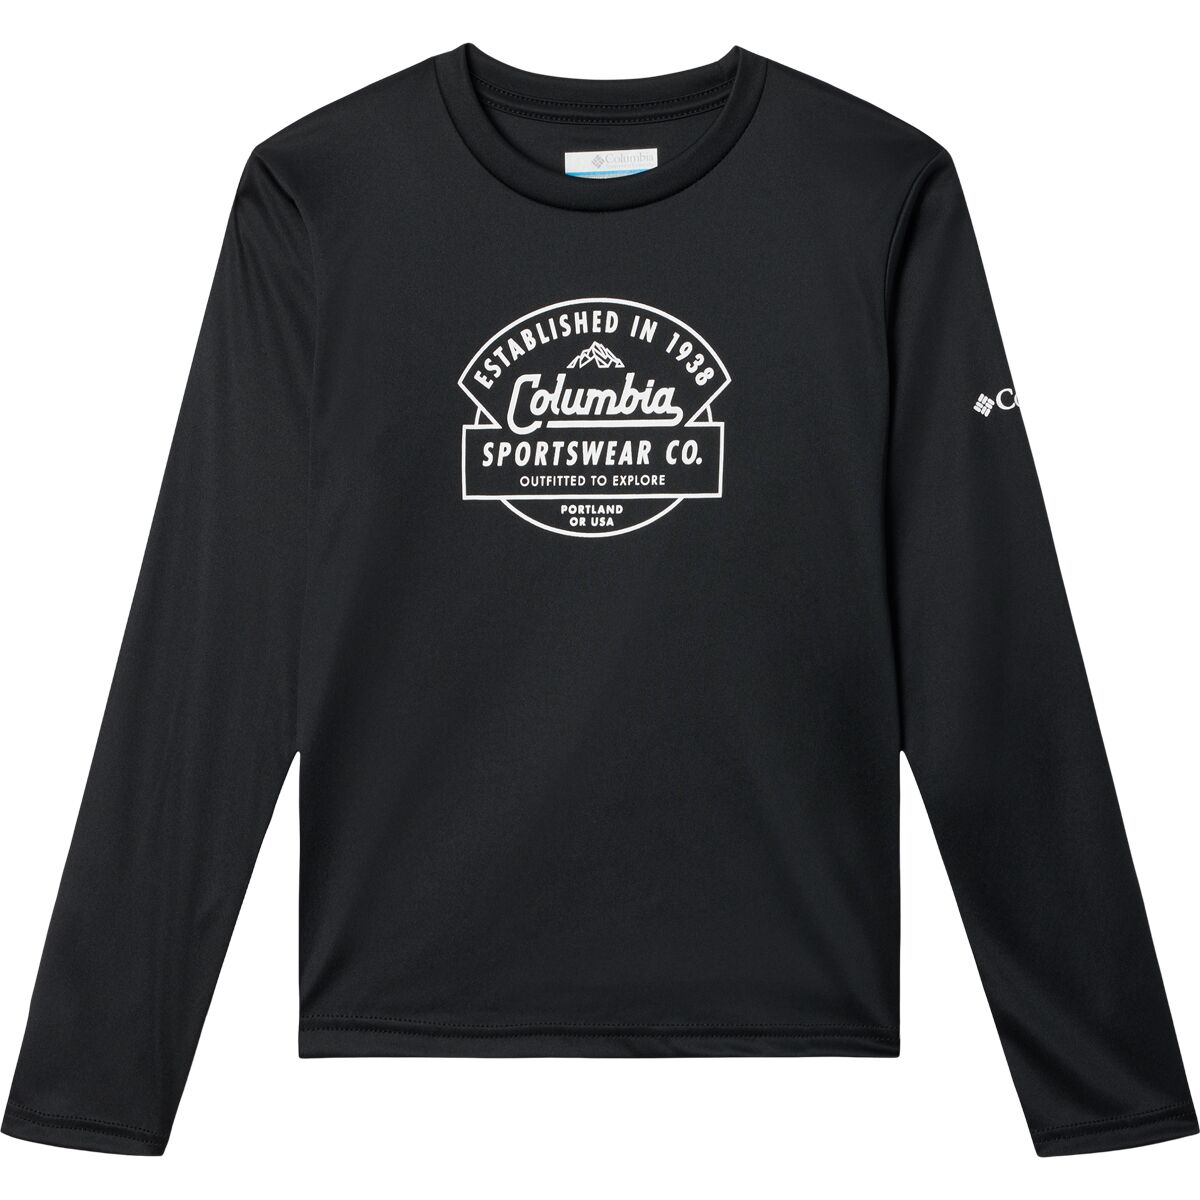 Columbia Grizzly Peak Long-Sleeve Graphic T-Shirt - Kids'